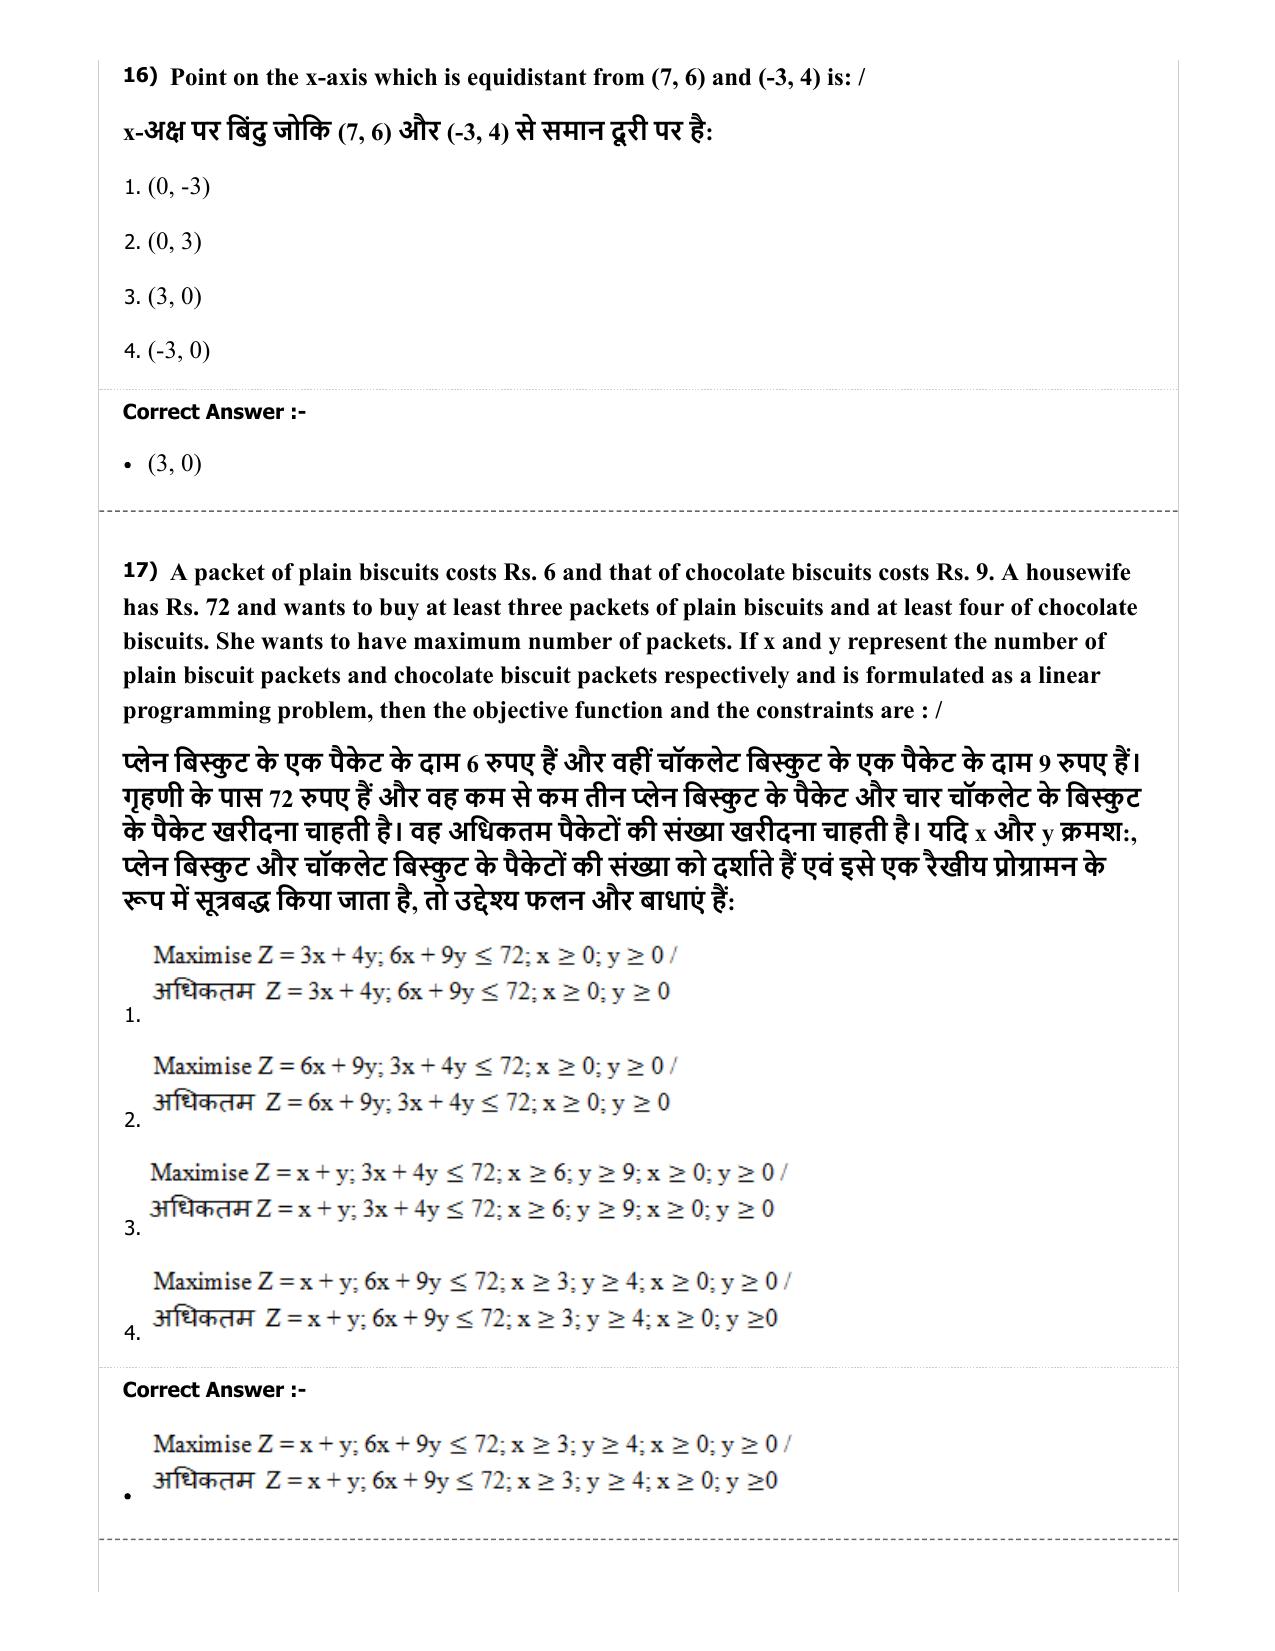 MP PAT (Exam. Date 29/06/2019 Time 2:00 PM) - PCM Question Paper - Page 45